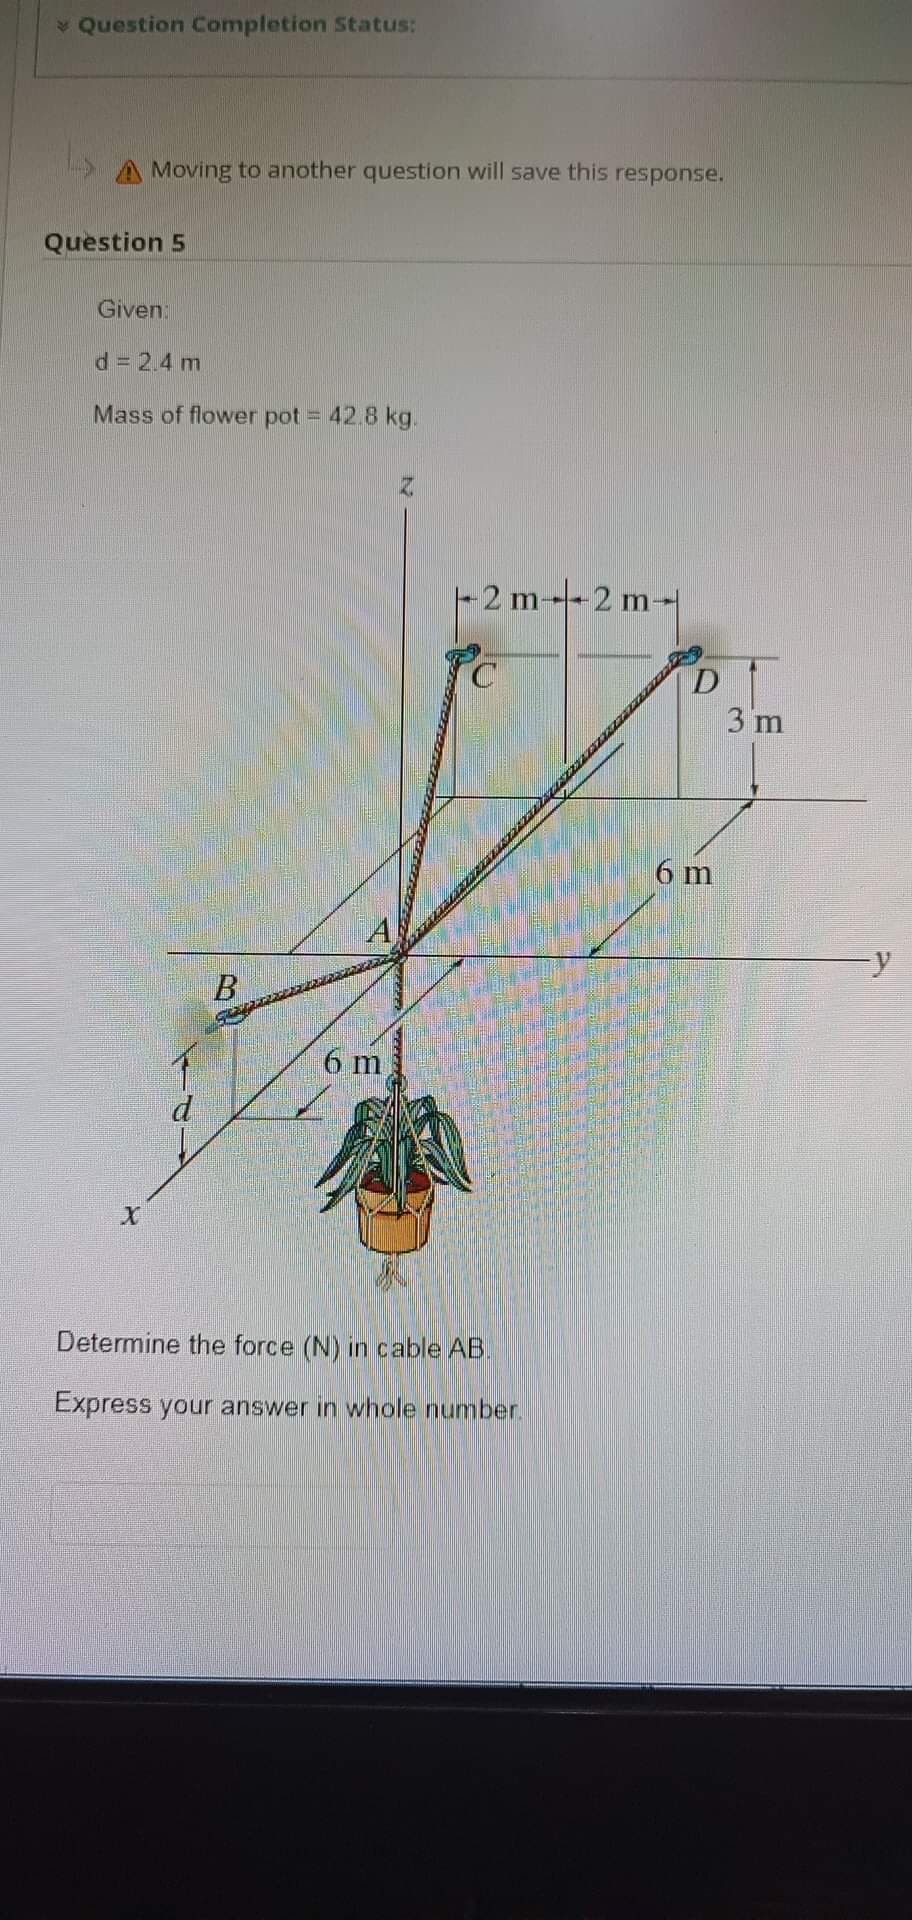 > Question Completion Status:
A Moving to another question will save this response.
Question 5
Given:
d = 2.4 m
Mass of flower pot = 42.8 kg.
X
d
B
A
6 m
Z
2 m-2 m-
Determine the force (N) in cable AB.
Express your answer in whole number.
D
6 m
3 m
y